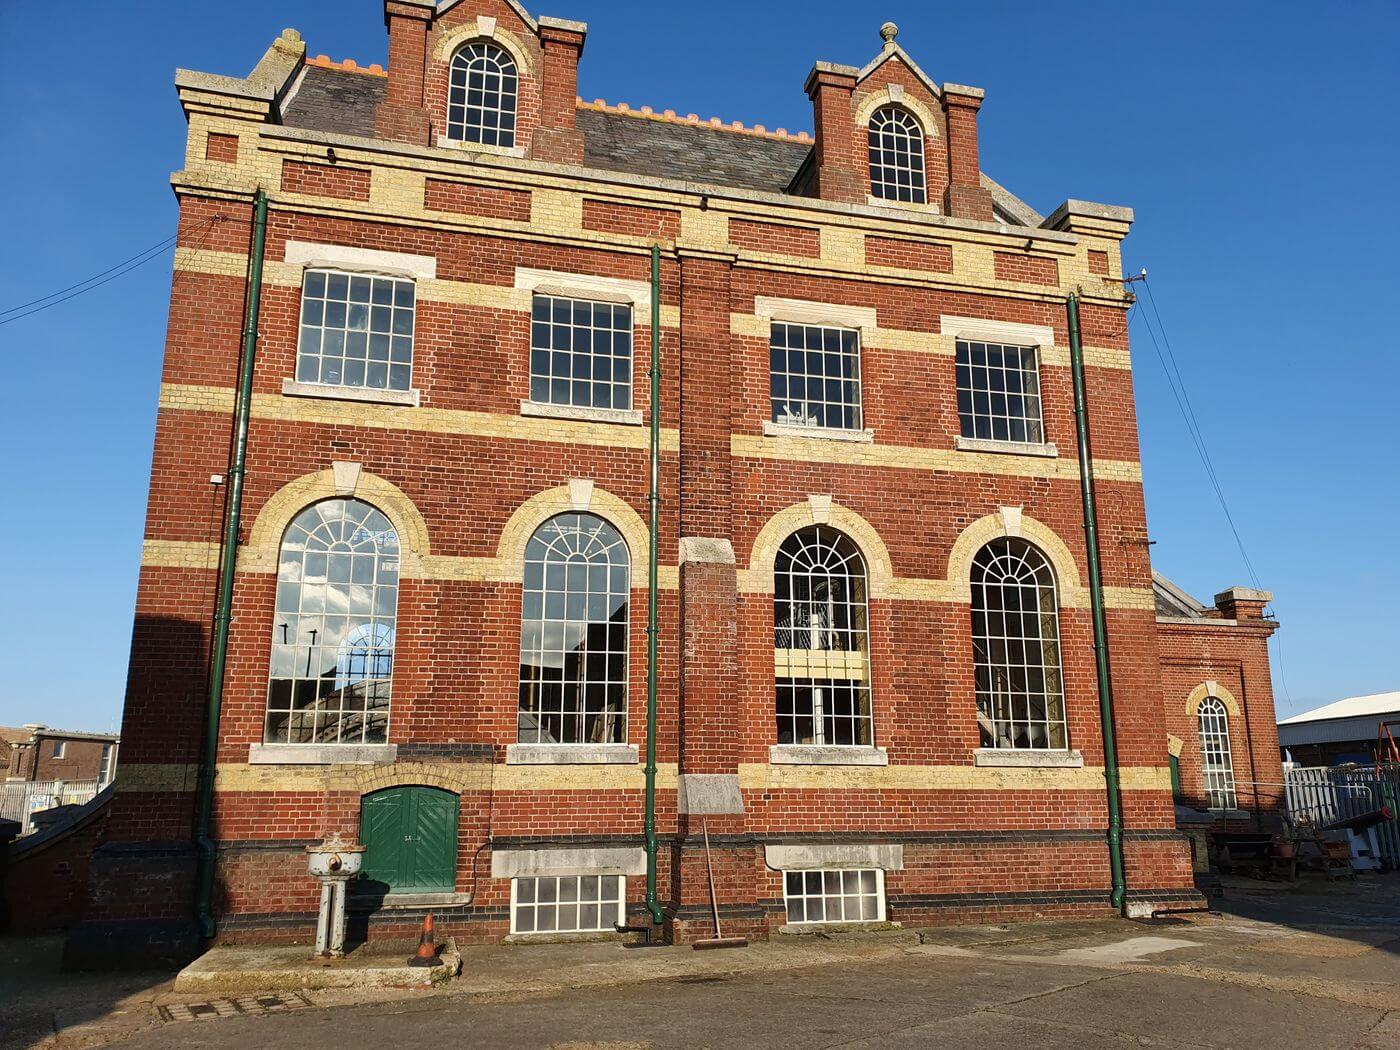 Pumping Station - Eastney 2